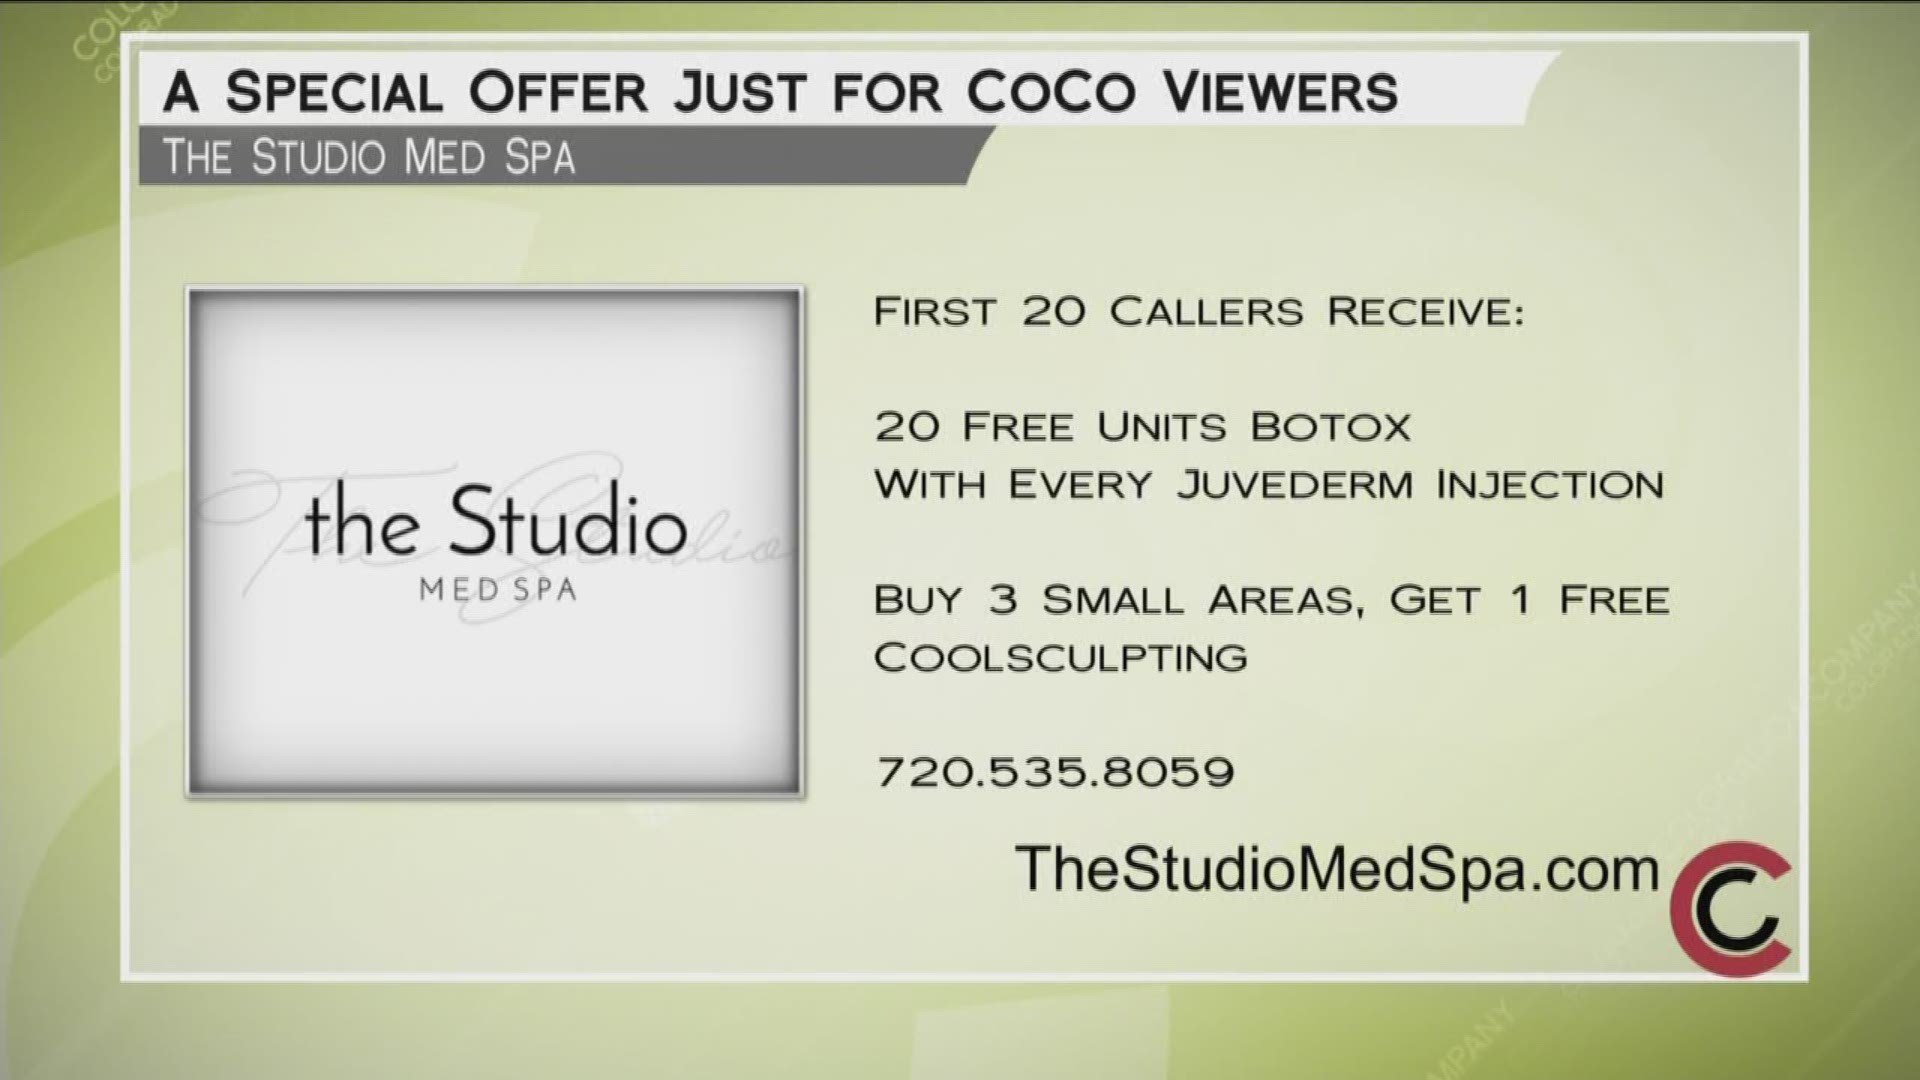 Call 720.535.8059 to book your service or consultation at one of the most sleek and modern aesthetic spas around—the Studio Med Spa! The first 20 callers right now will receive 20 free units of Botox with every Juvederm injection. Also take advantage of a great deal on Coolsculpting. When you buy three small areas, you’ll get your fourth for free. Learn more online at www.TheStudioMedSpa.com. 
THIS INTERVIEW HAS COMMERCIAL CONTENT. PRODUCTS AND SERVICES FEATURED APPEAR AS PAID ADVERTISING.